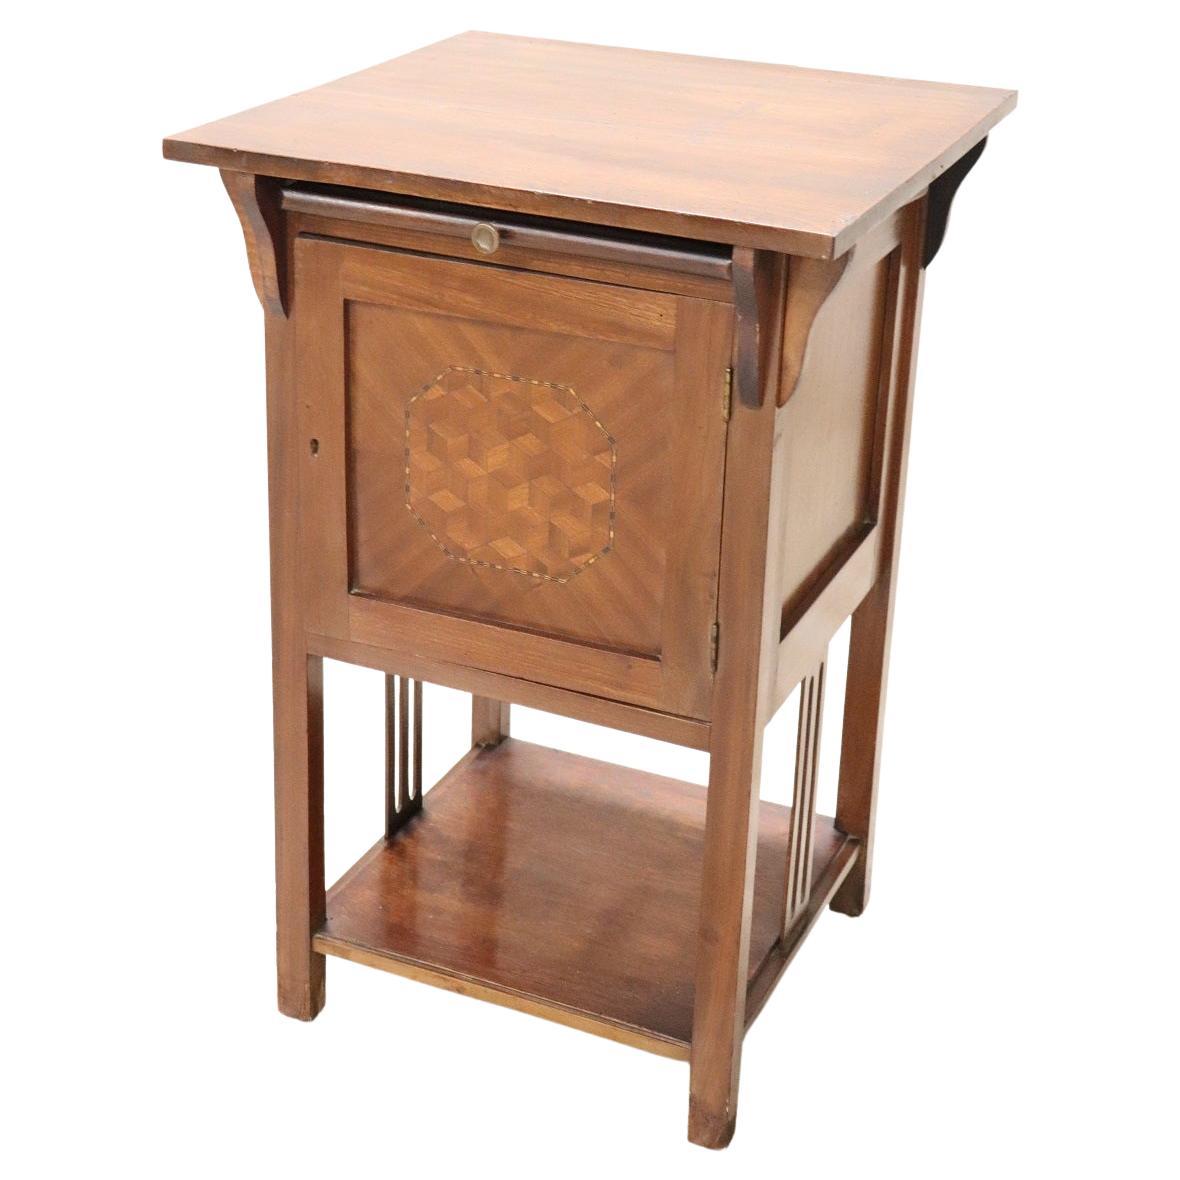 Early 20th Century Art Nouveau Inlaid Wood Side Table For Sale